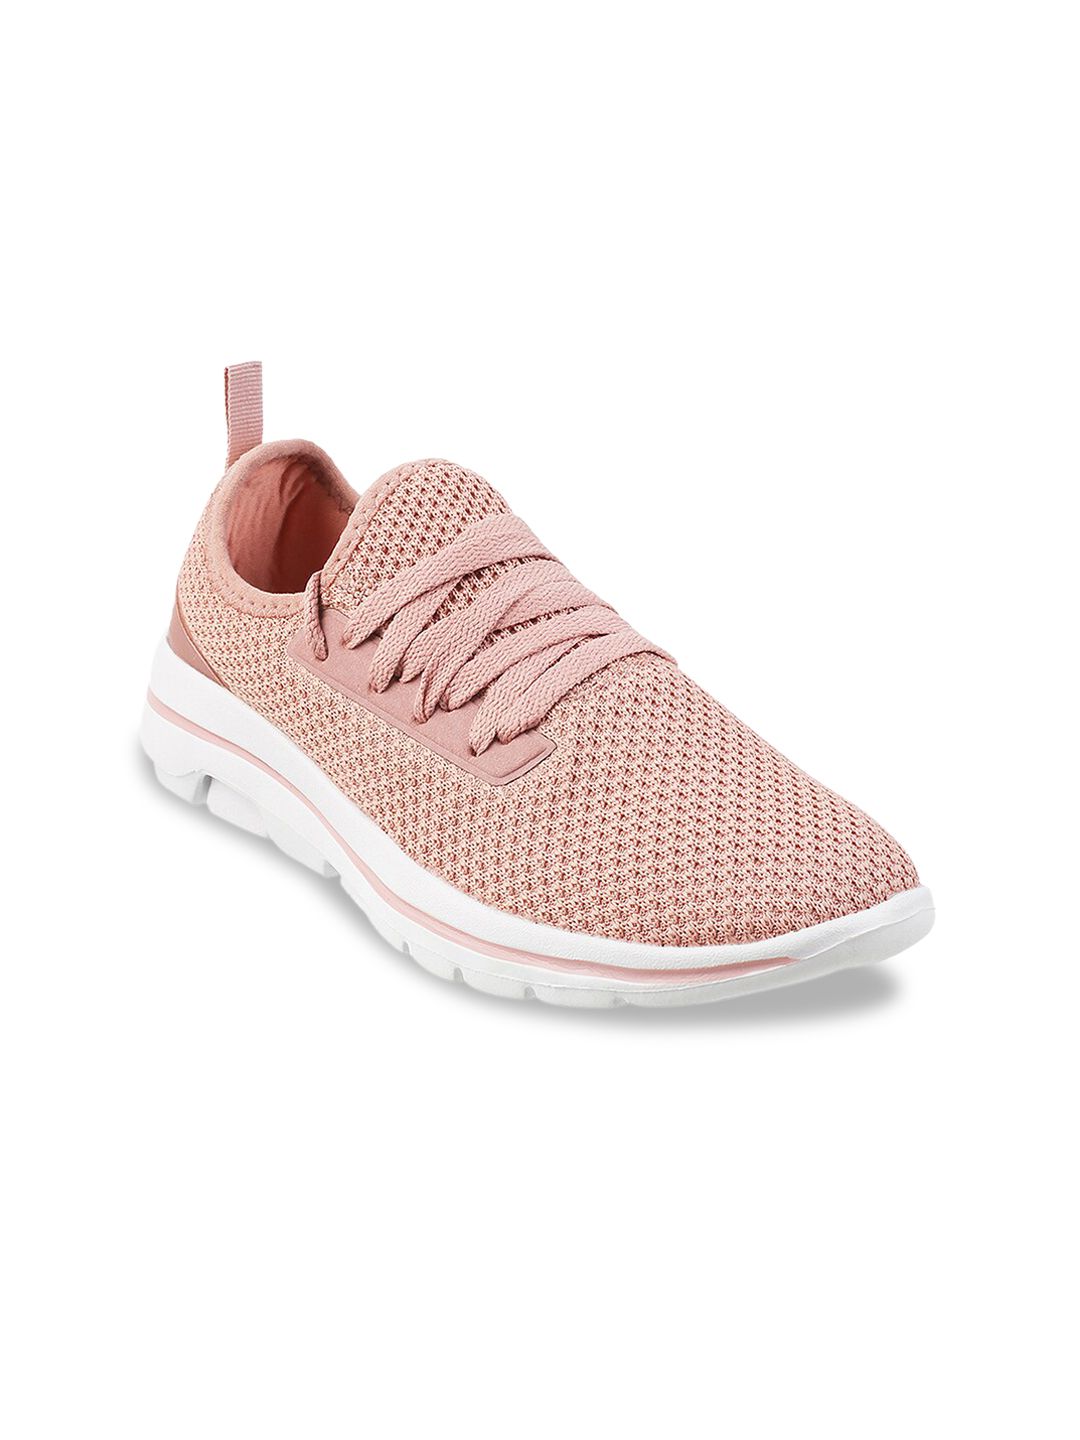 ACTIV Women Pink & White Textured Synthetic Sneakers Price in India